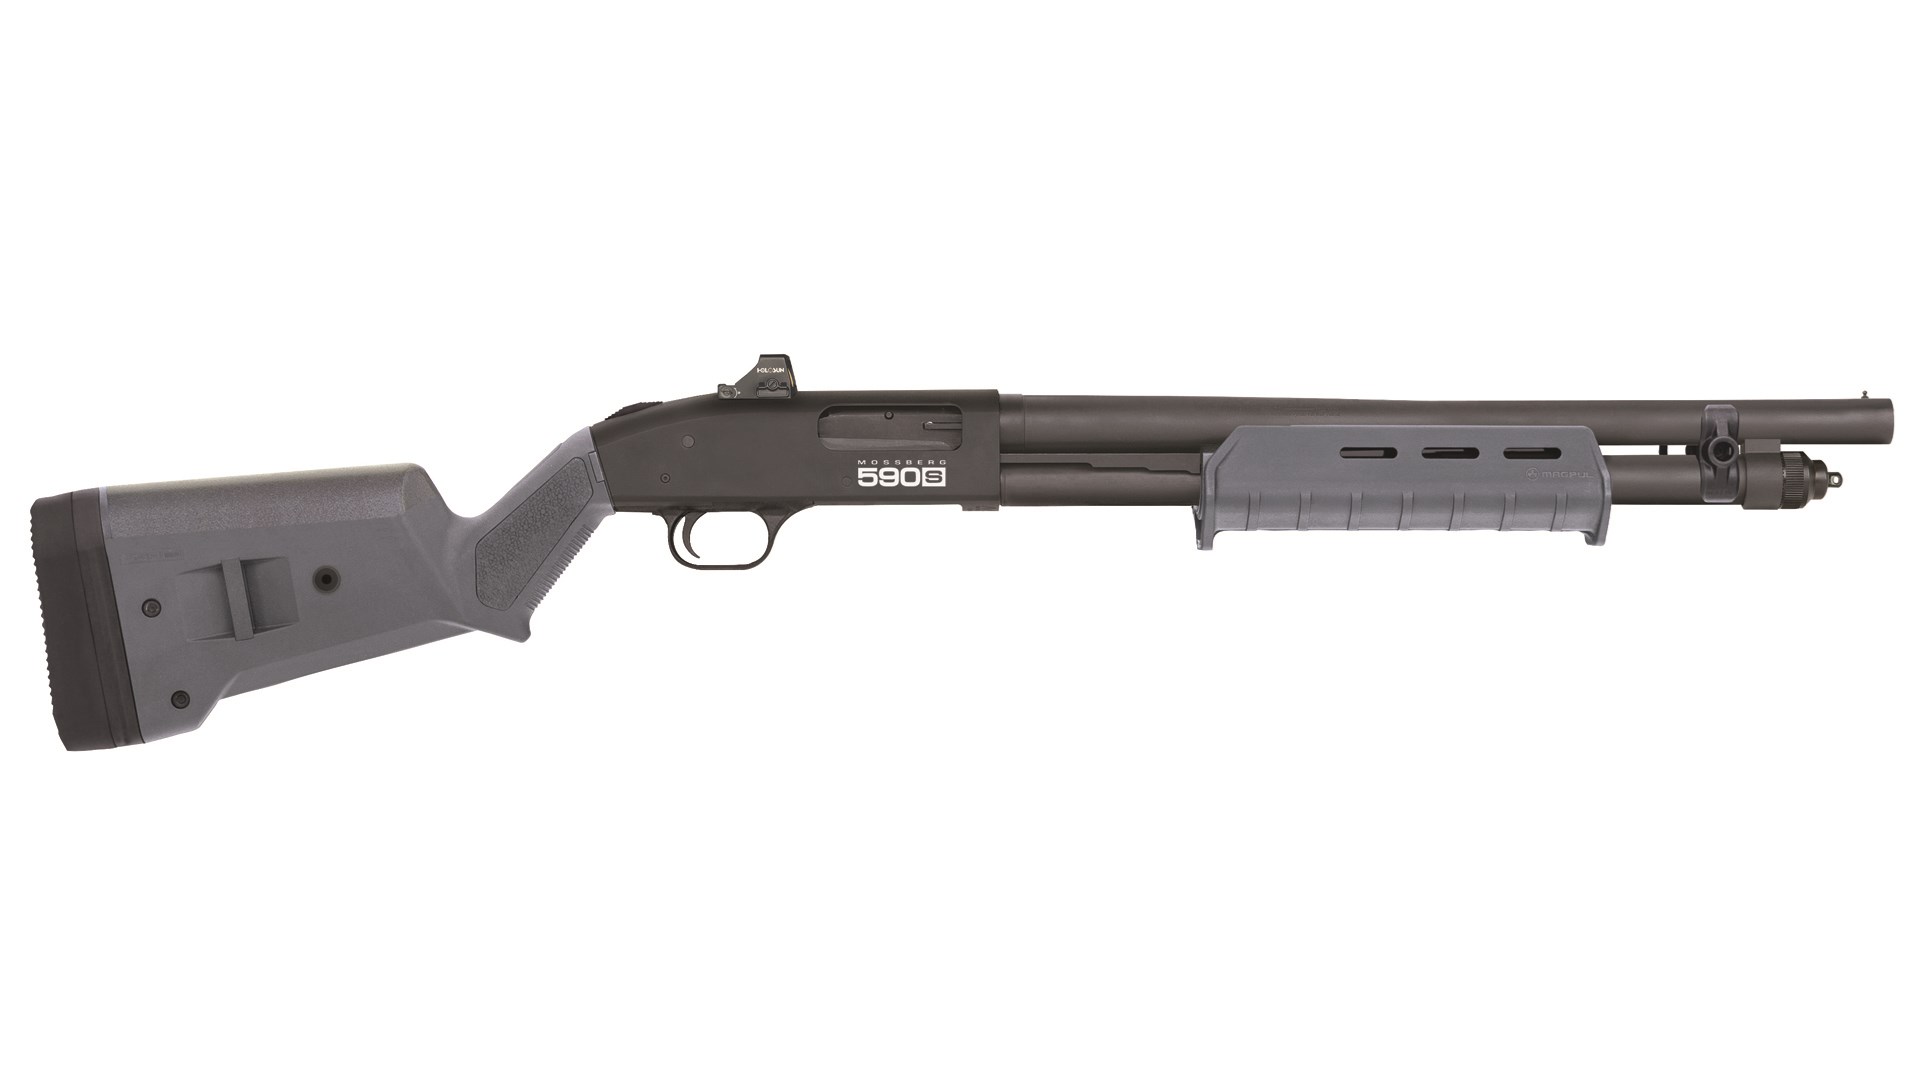 Mossberg 590S Magpul Edition shotgun shown with a red-dot sight installed.